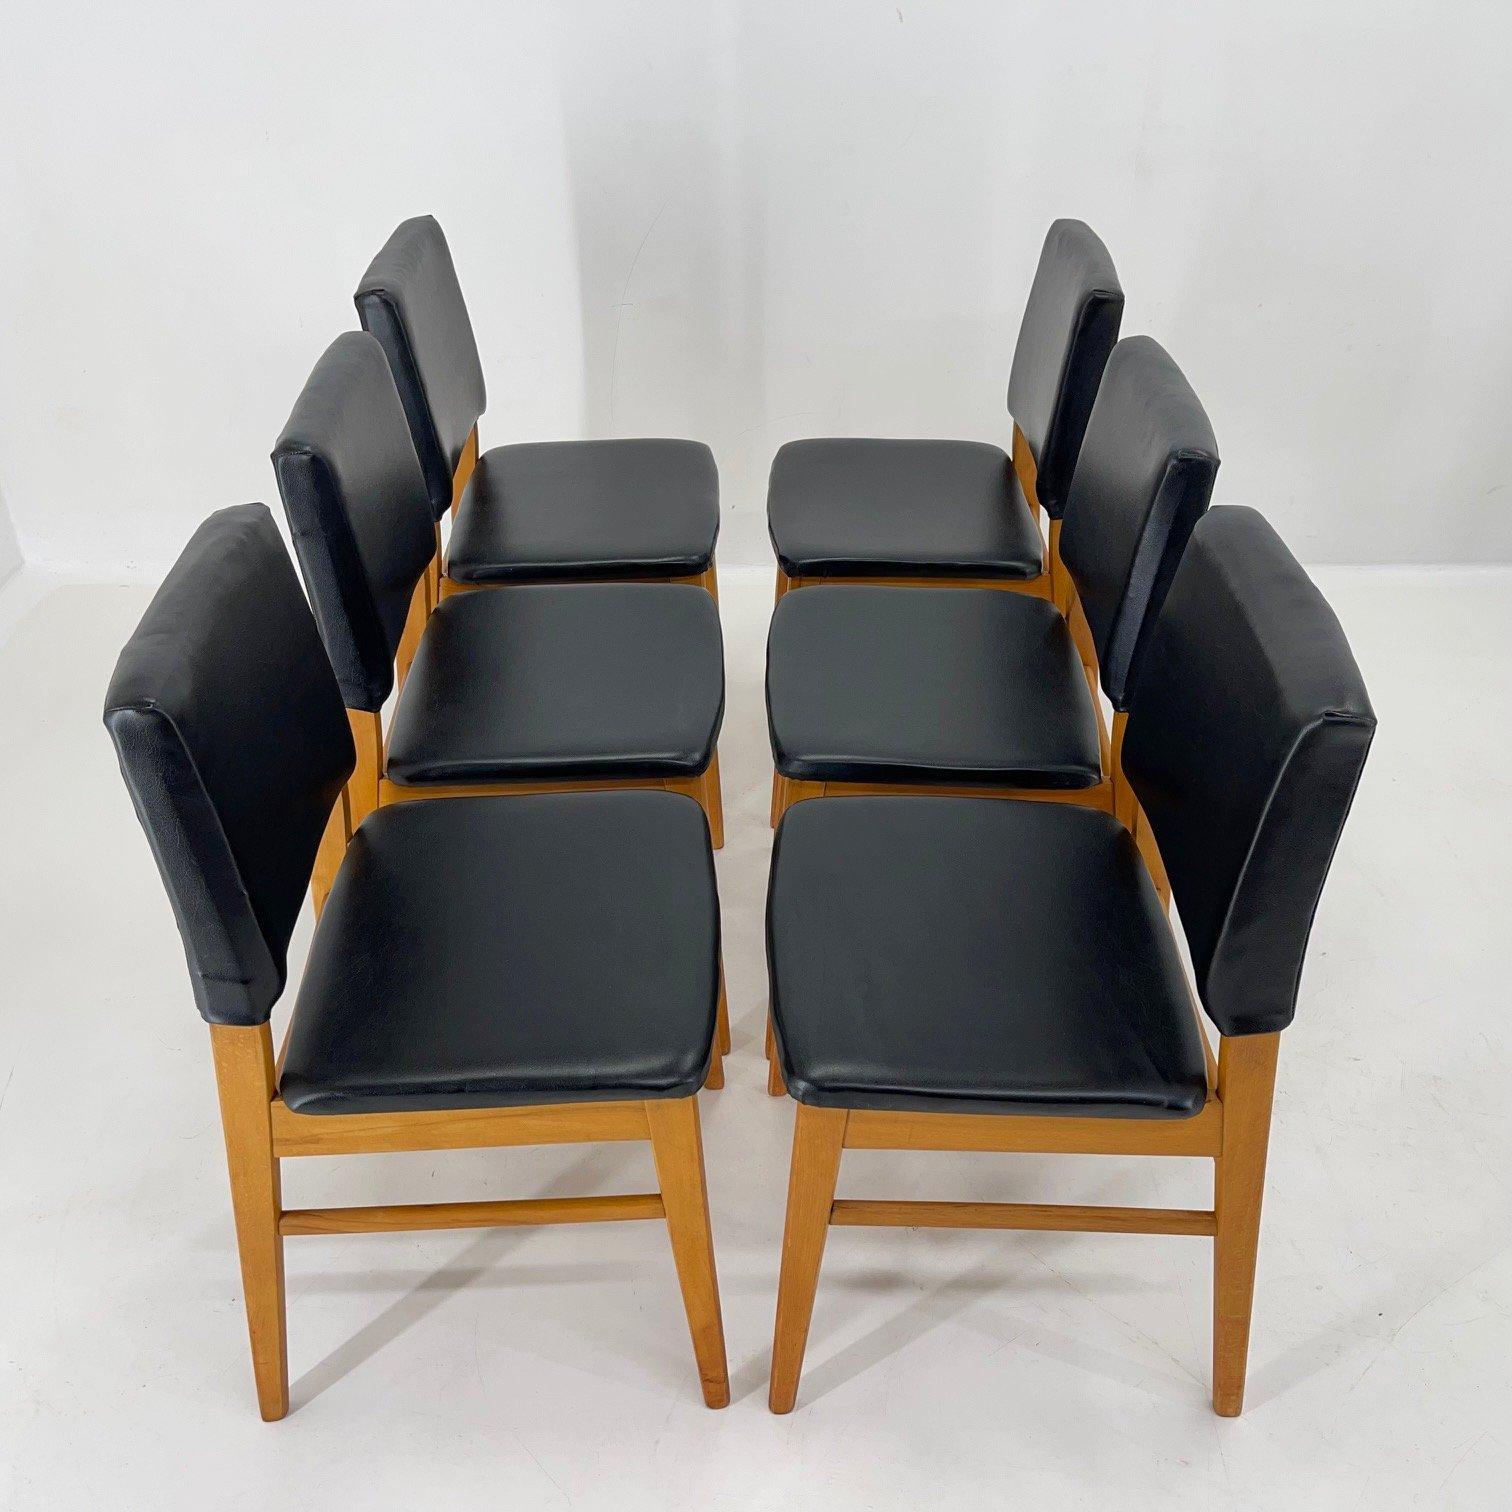 Set of six vintage leatherette and wood chairs made in Czechoslovakia in the 1960's. Wooden parts were refurbished.